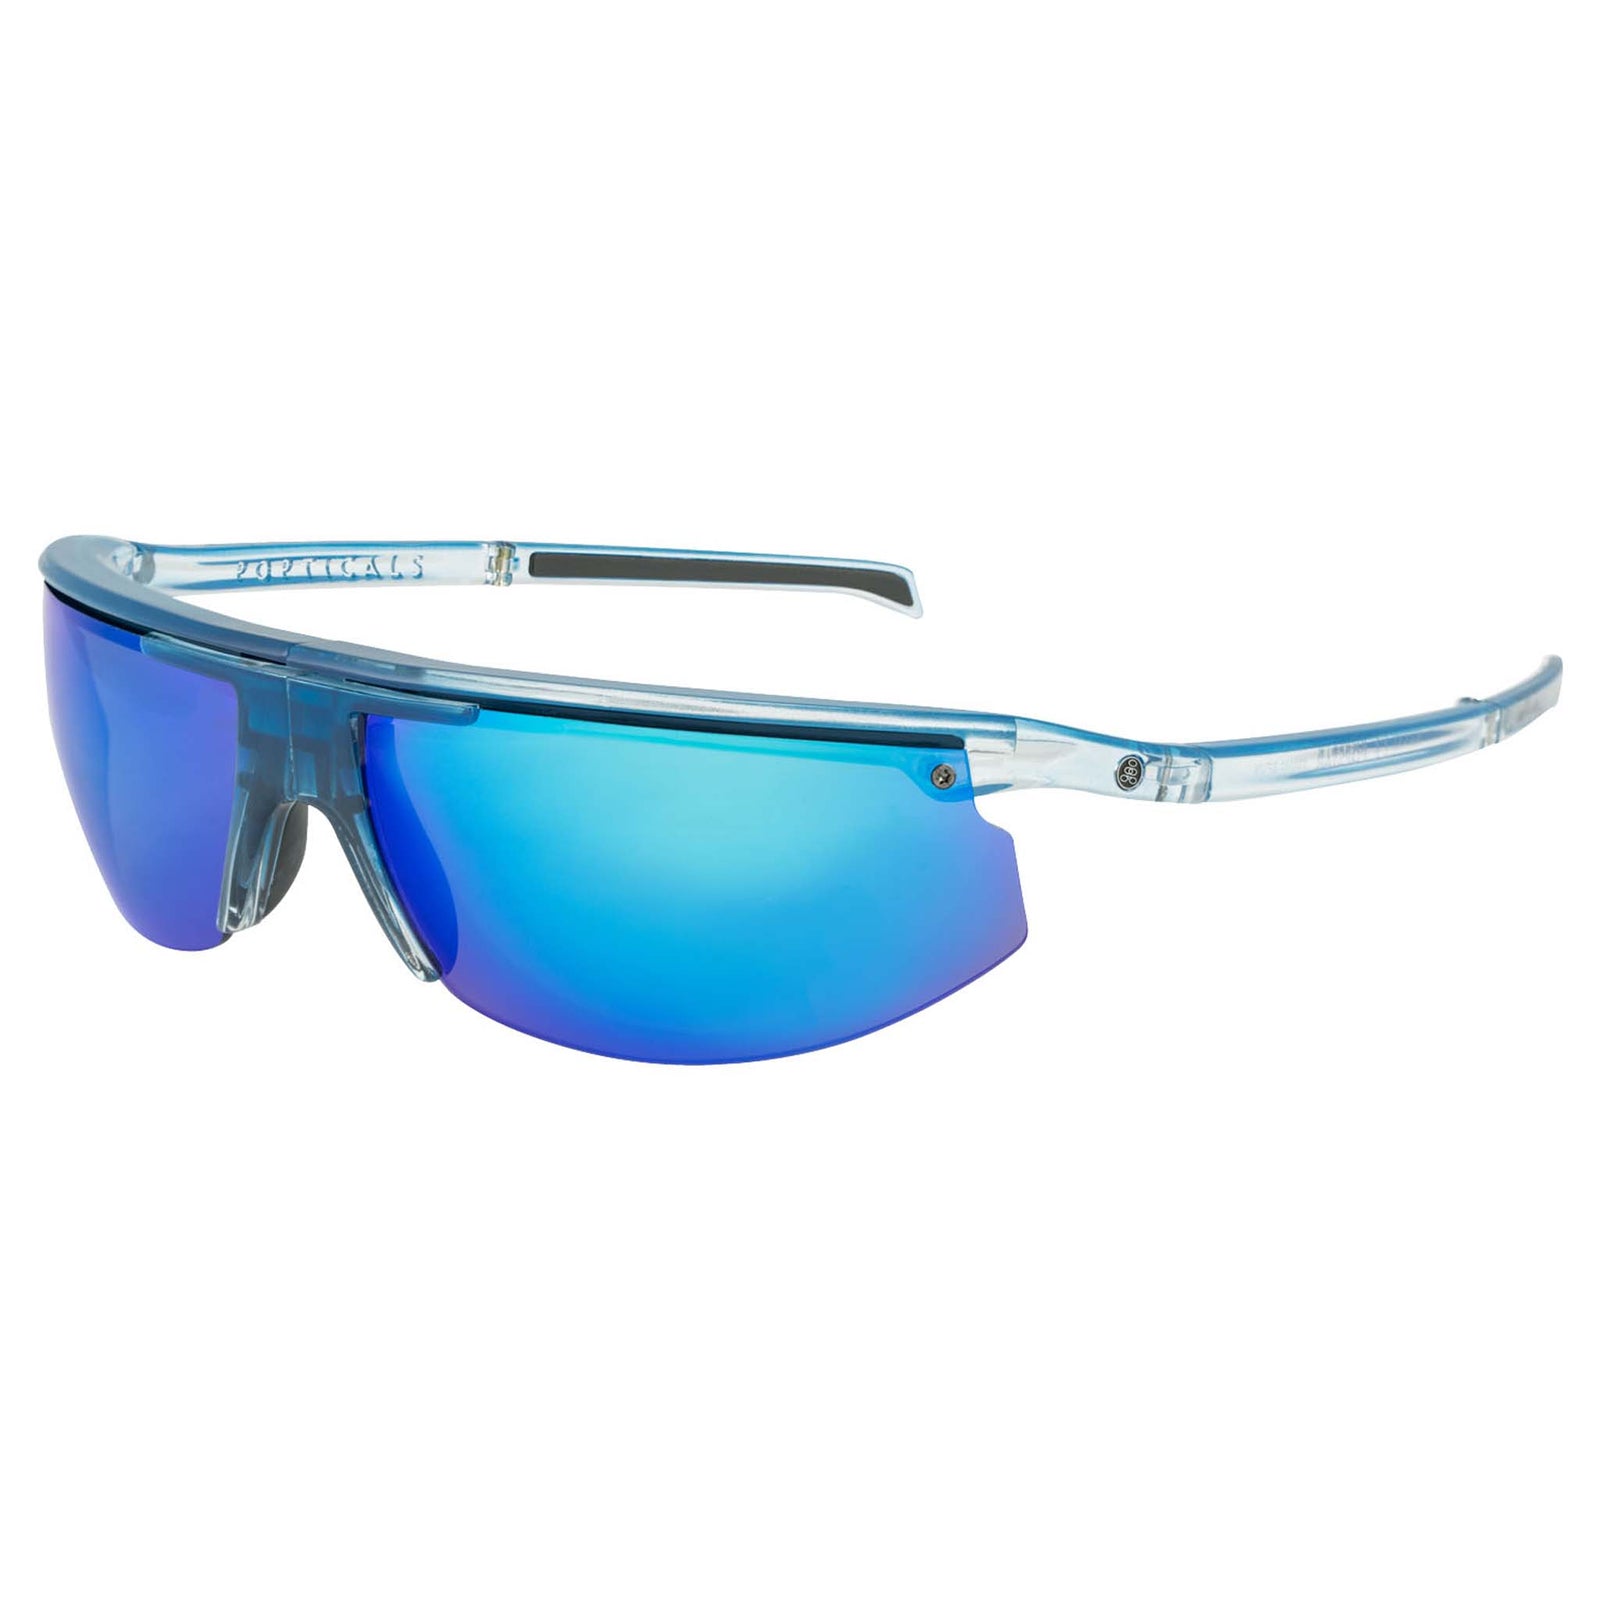 Popticals, Premium Compact Sunglasses, PopStar, 030040-BFUN, Polarized Sunglasses, Gloss Blue/Clear Crystal Frame, Gray Lenses w/Blue Mirror Finish, Glam View